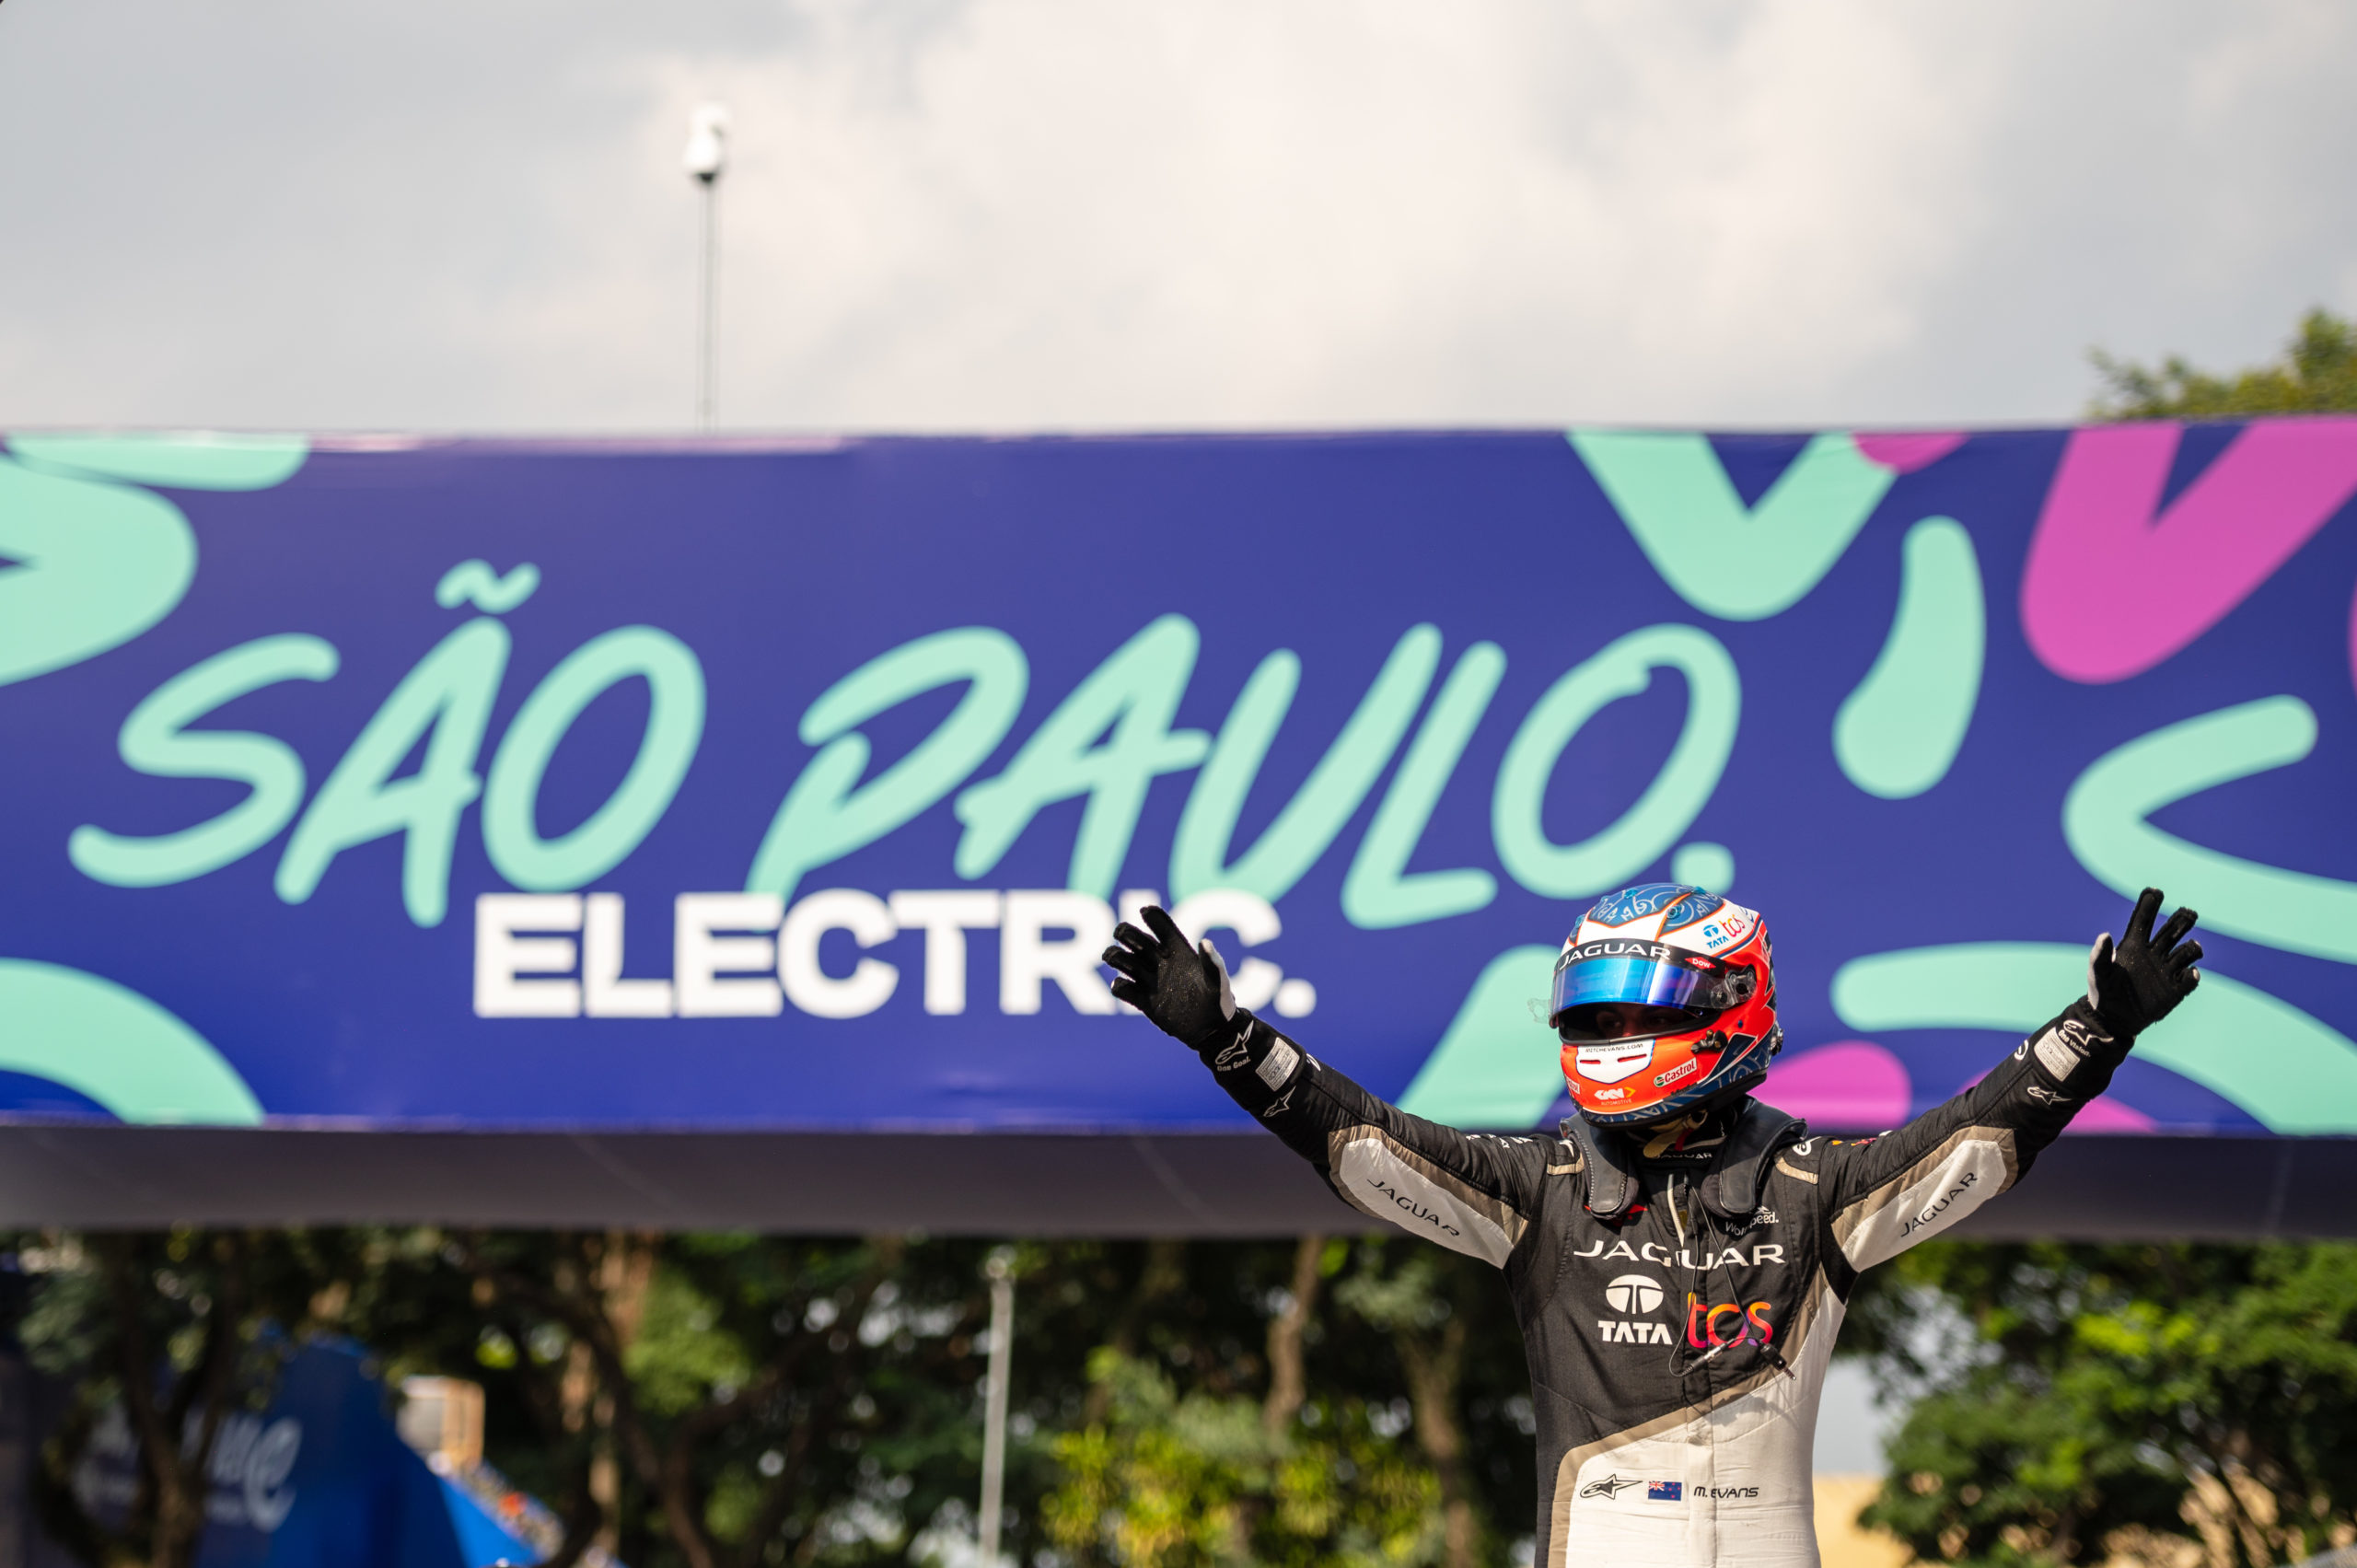 winners and losers from formula e’s sao paulo debut